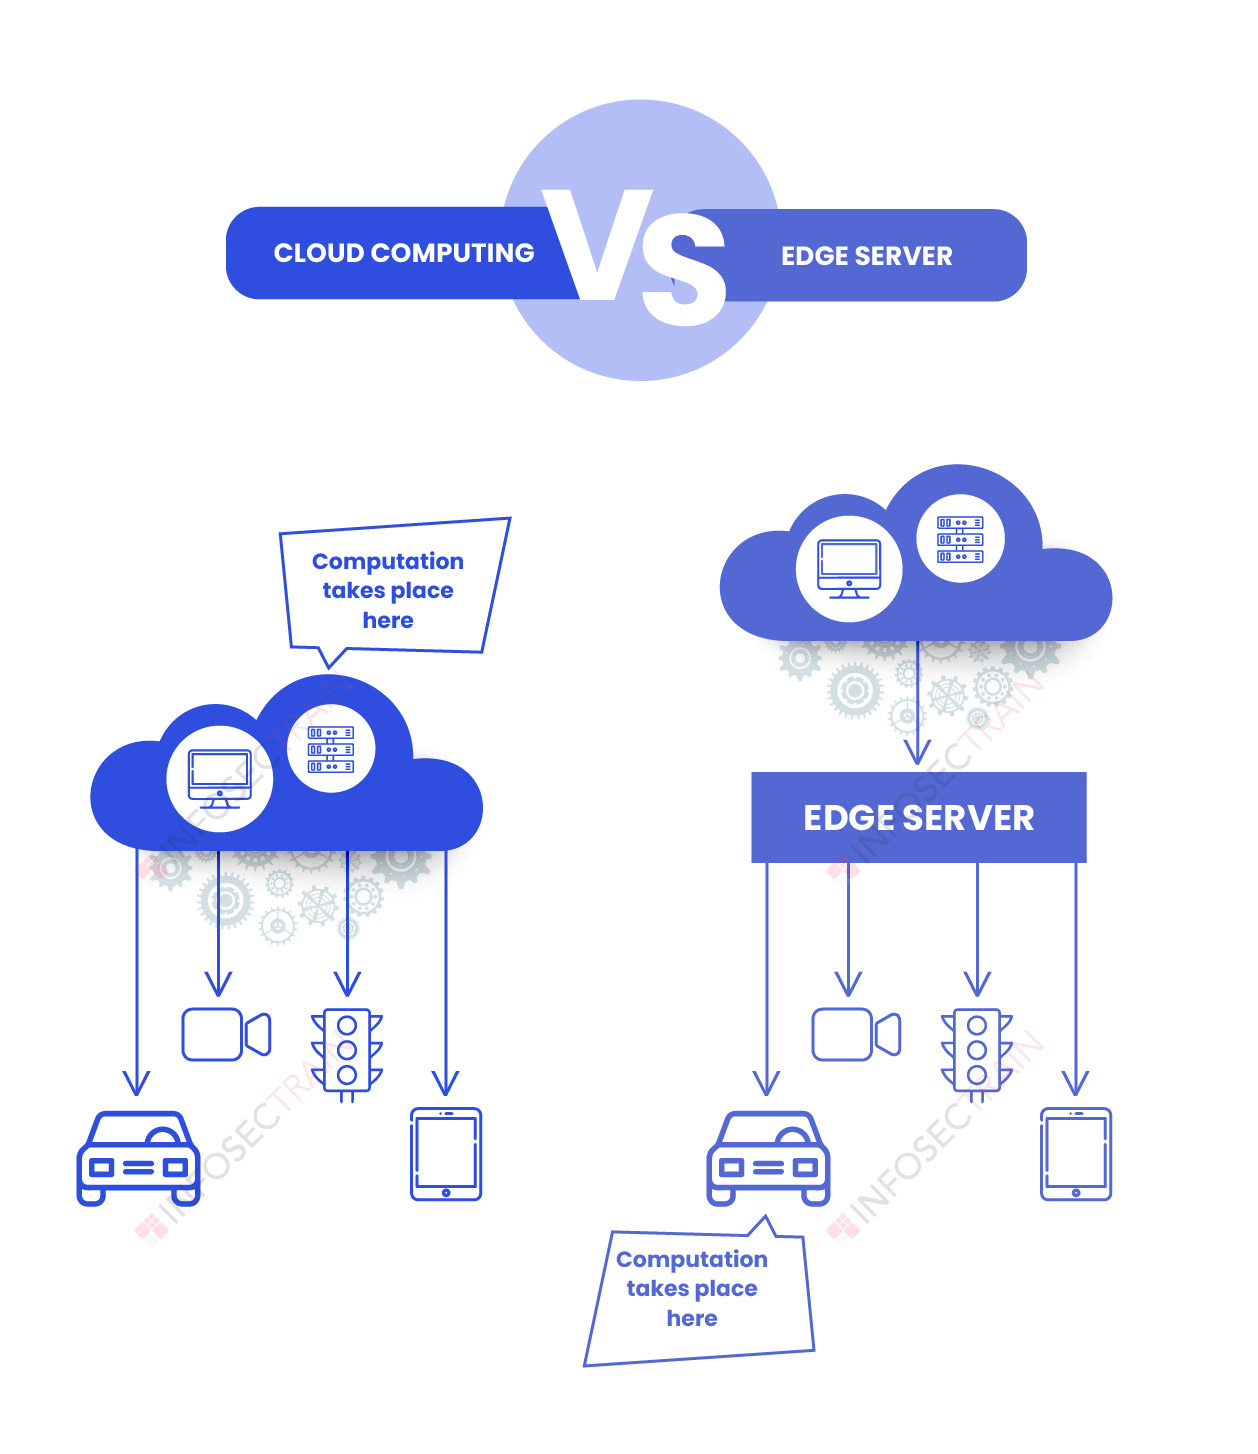 Differences between Cloud Computing and Edge Computing